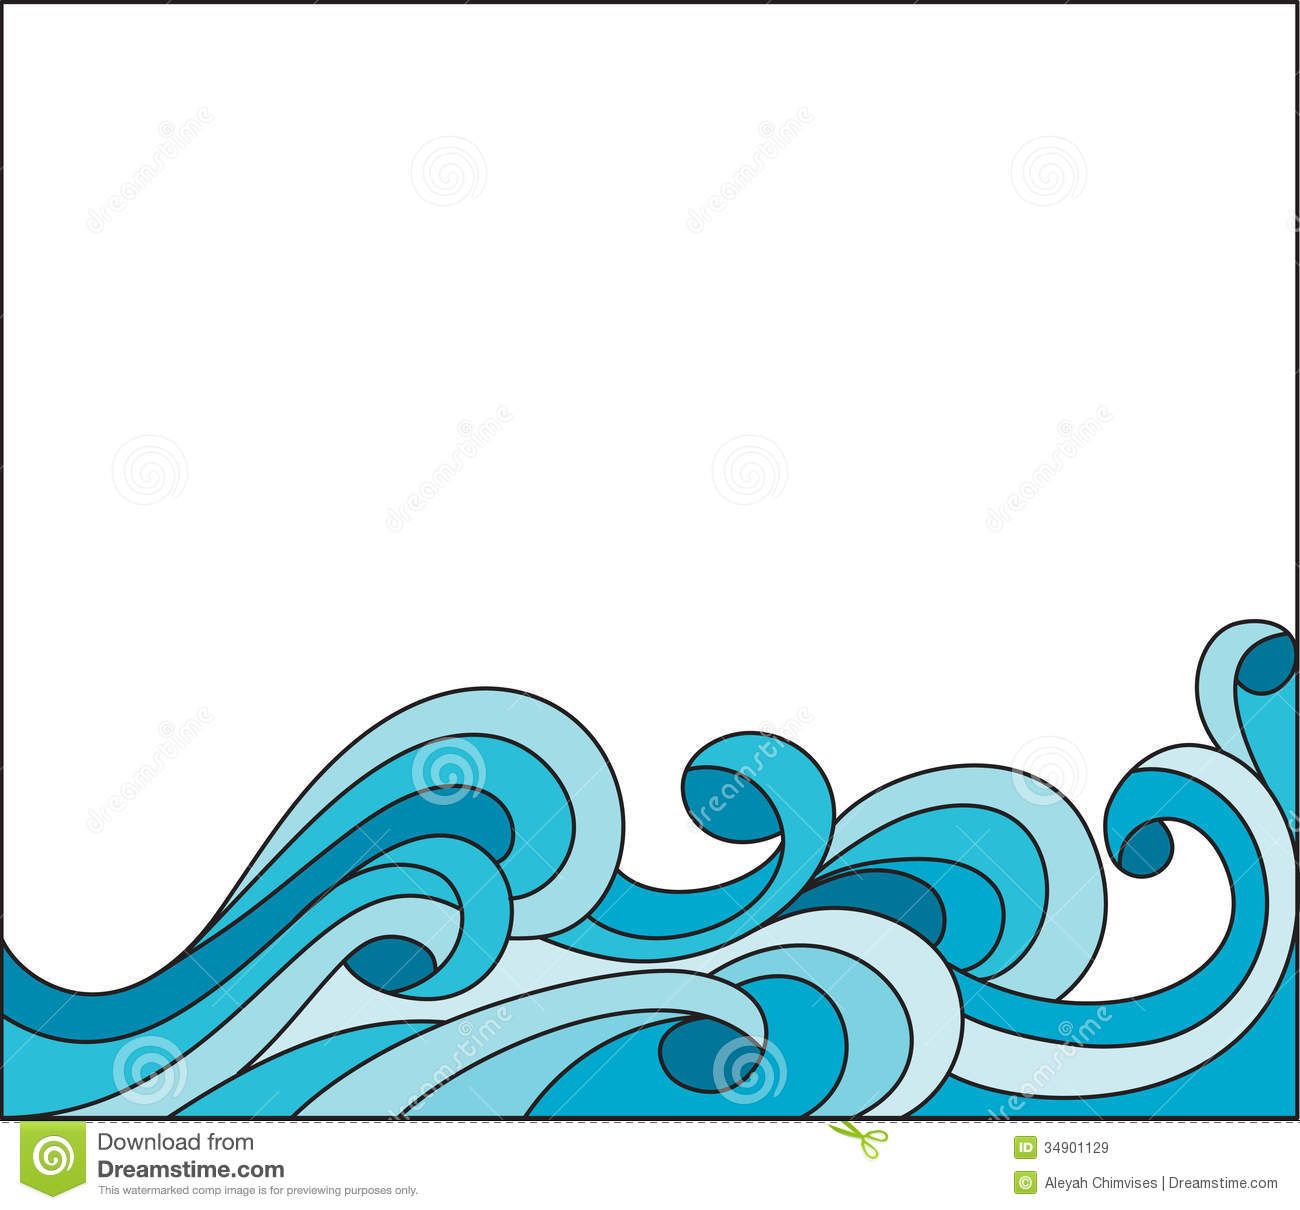 Clipart wave frame. Download from over million